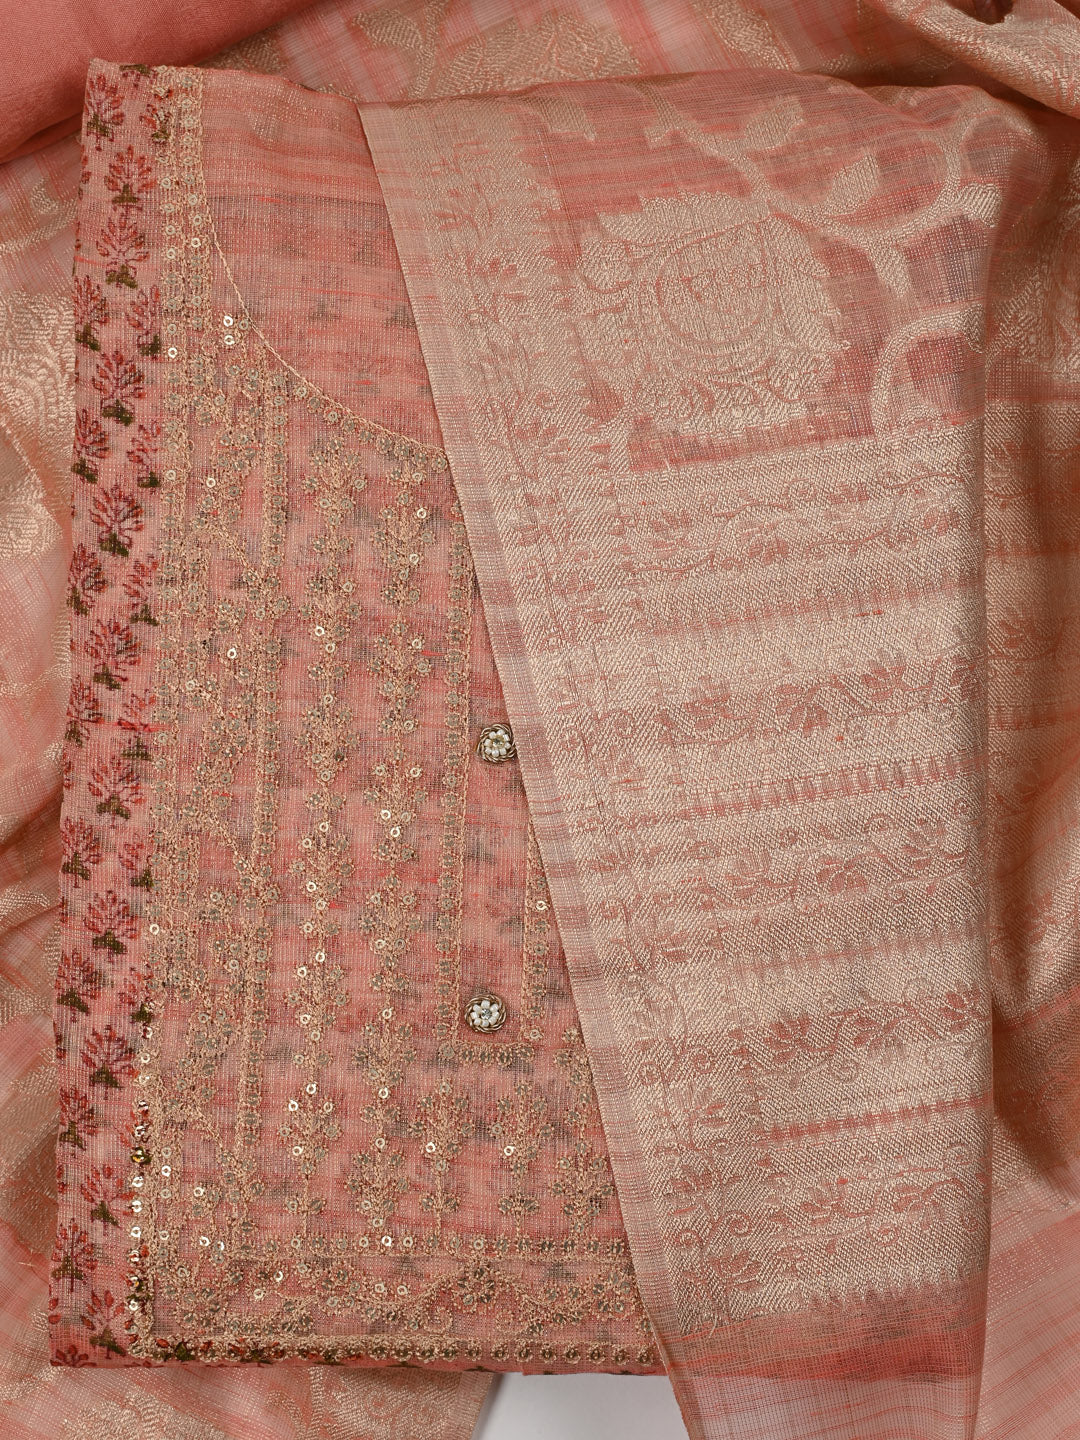 Printed & Neck Embroidered Unstitched Suit Piece With Dupatta